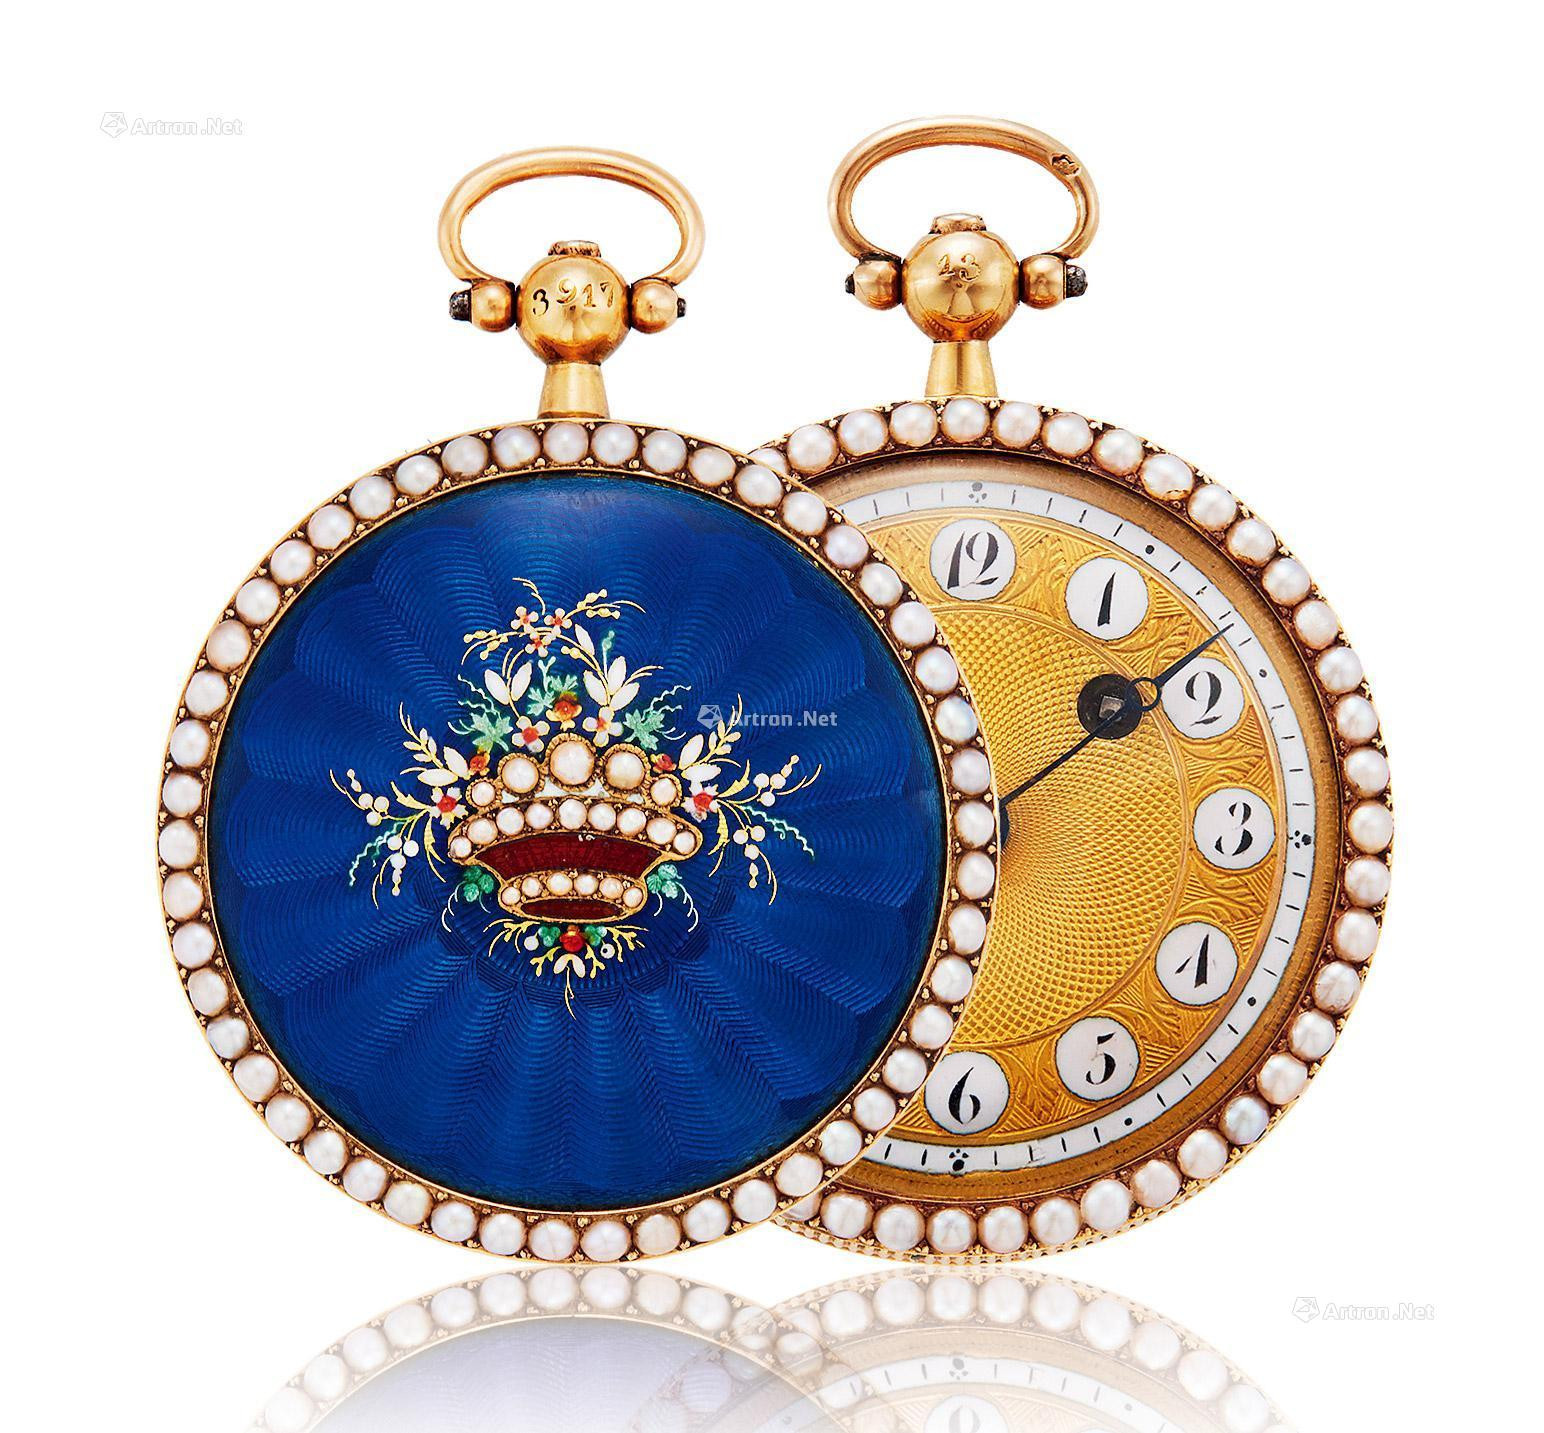 SWITZERLAND A YELLOW GOLD OPEN-FACED MANUALLY-WOUND POCKET WATCH WITH ENAMEL AND PEARL-SET CASE